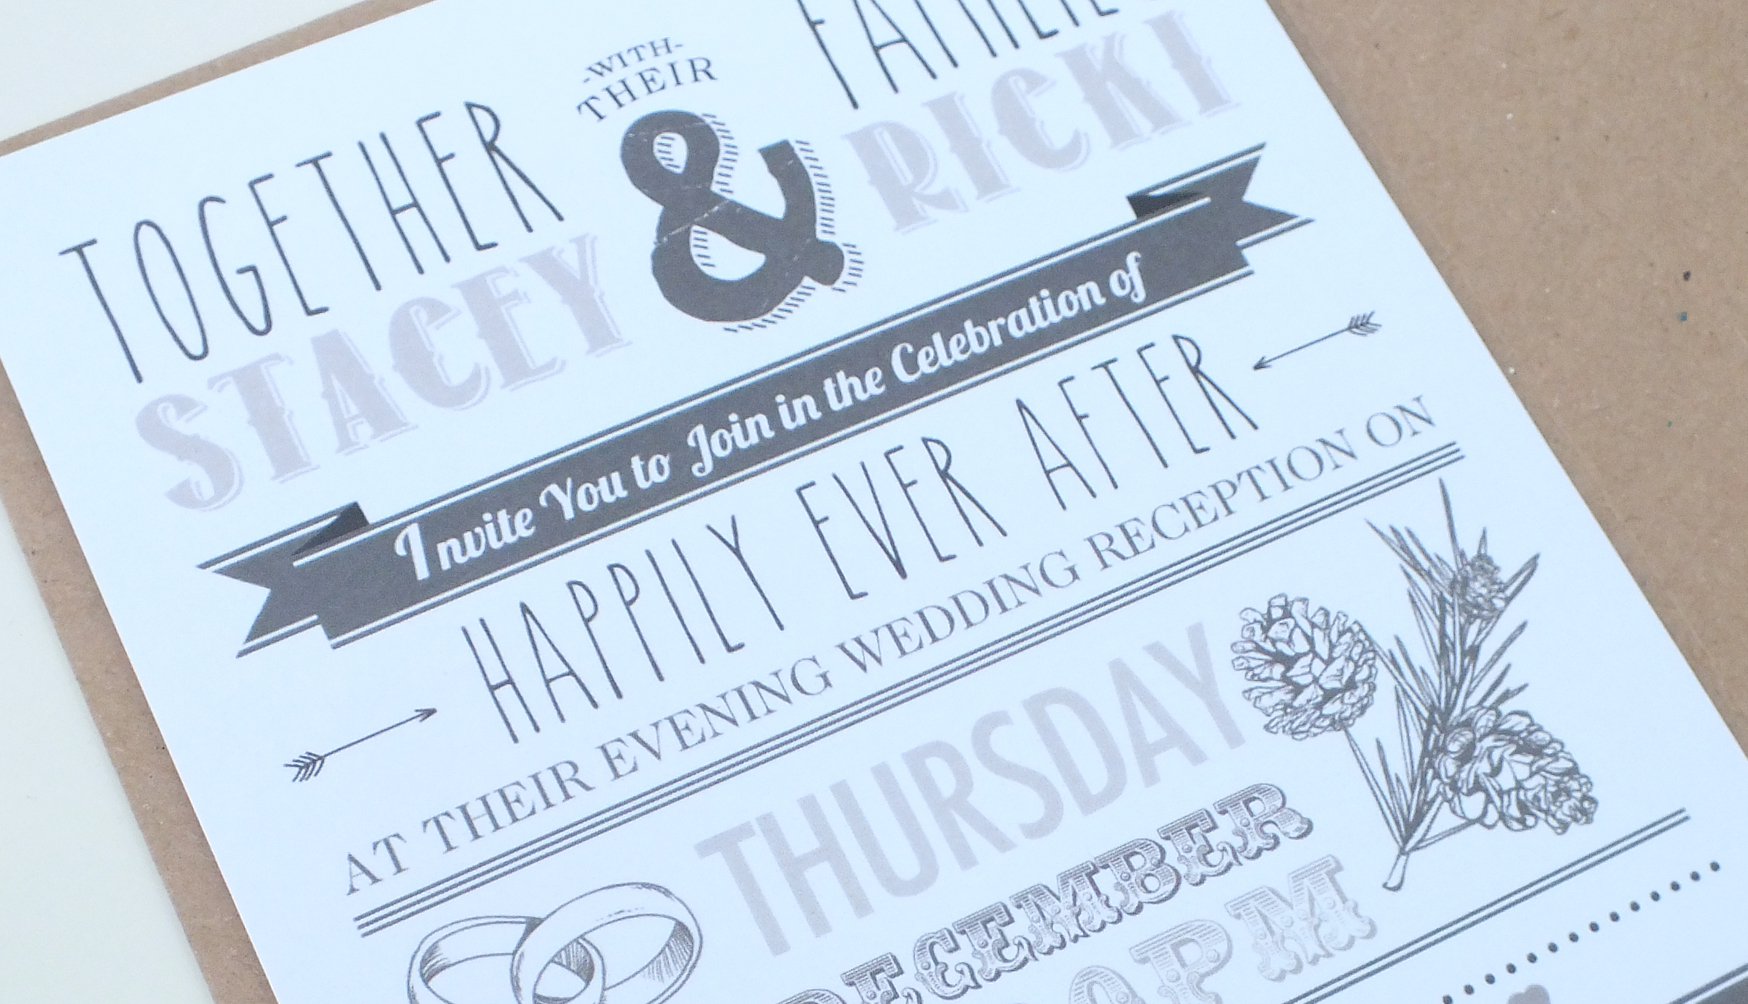 How to word and use different fonts in wedding invitations